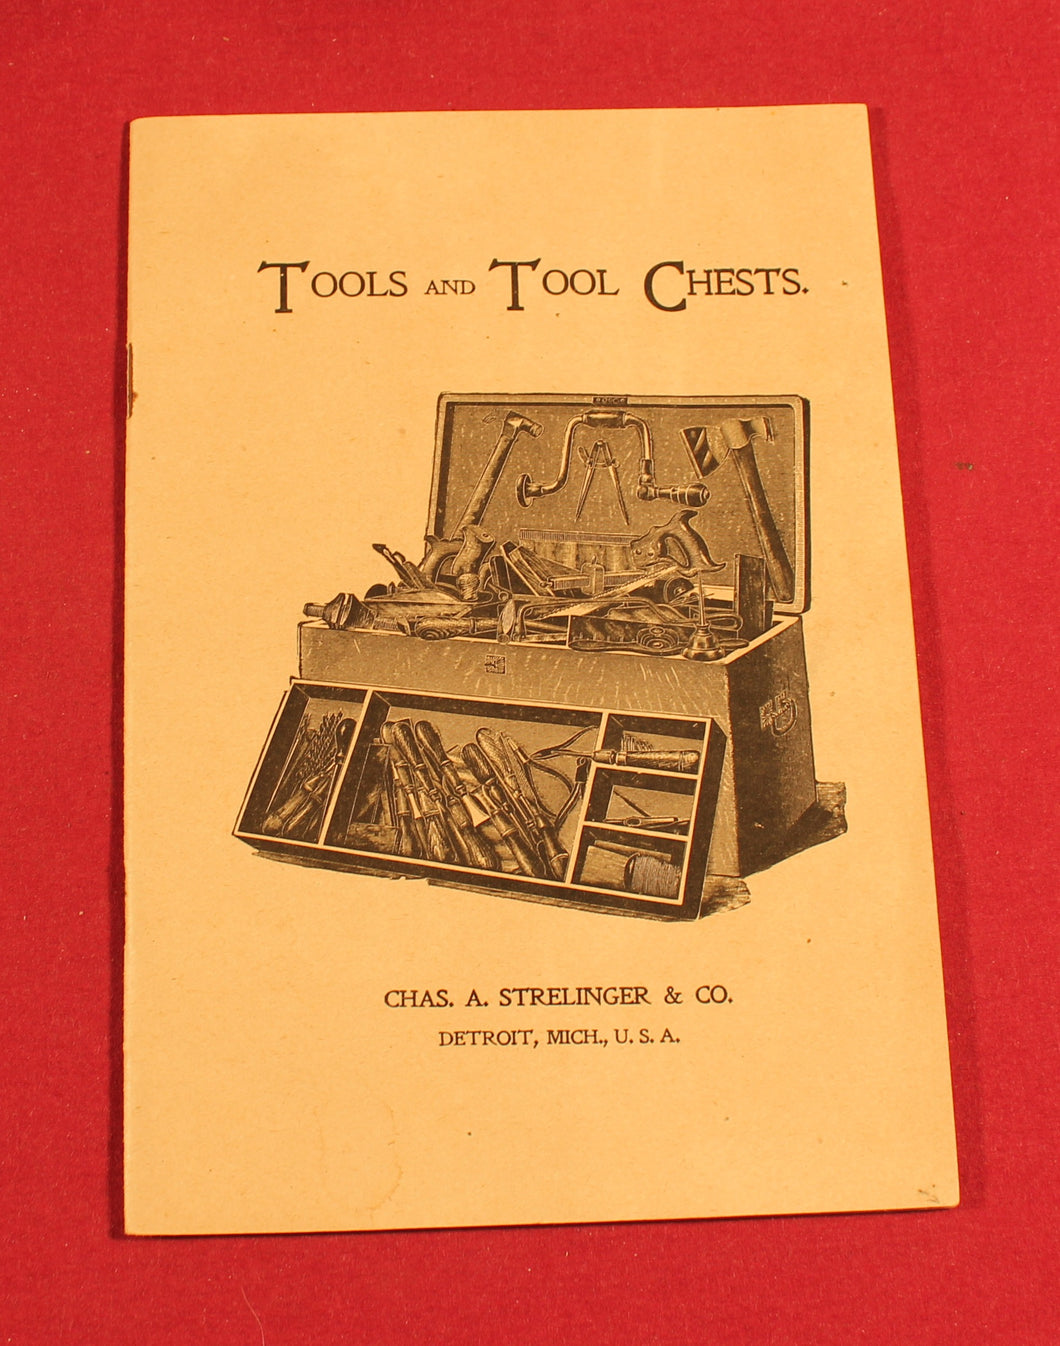 Vintage 1895 Chas. A. Strelingre & Co. Catalog “Tools and tool Chests”